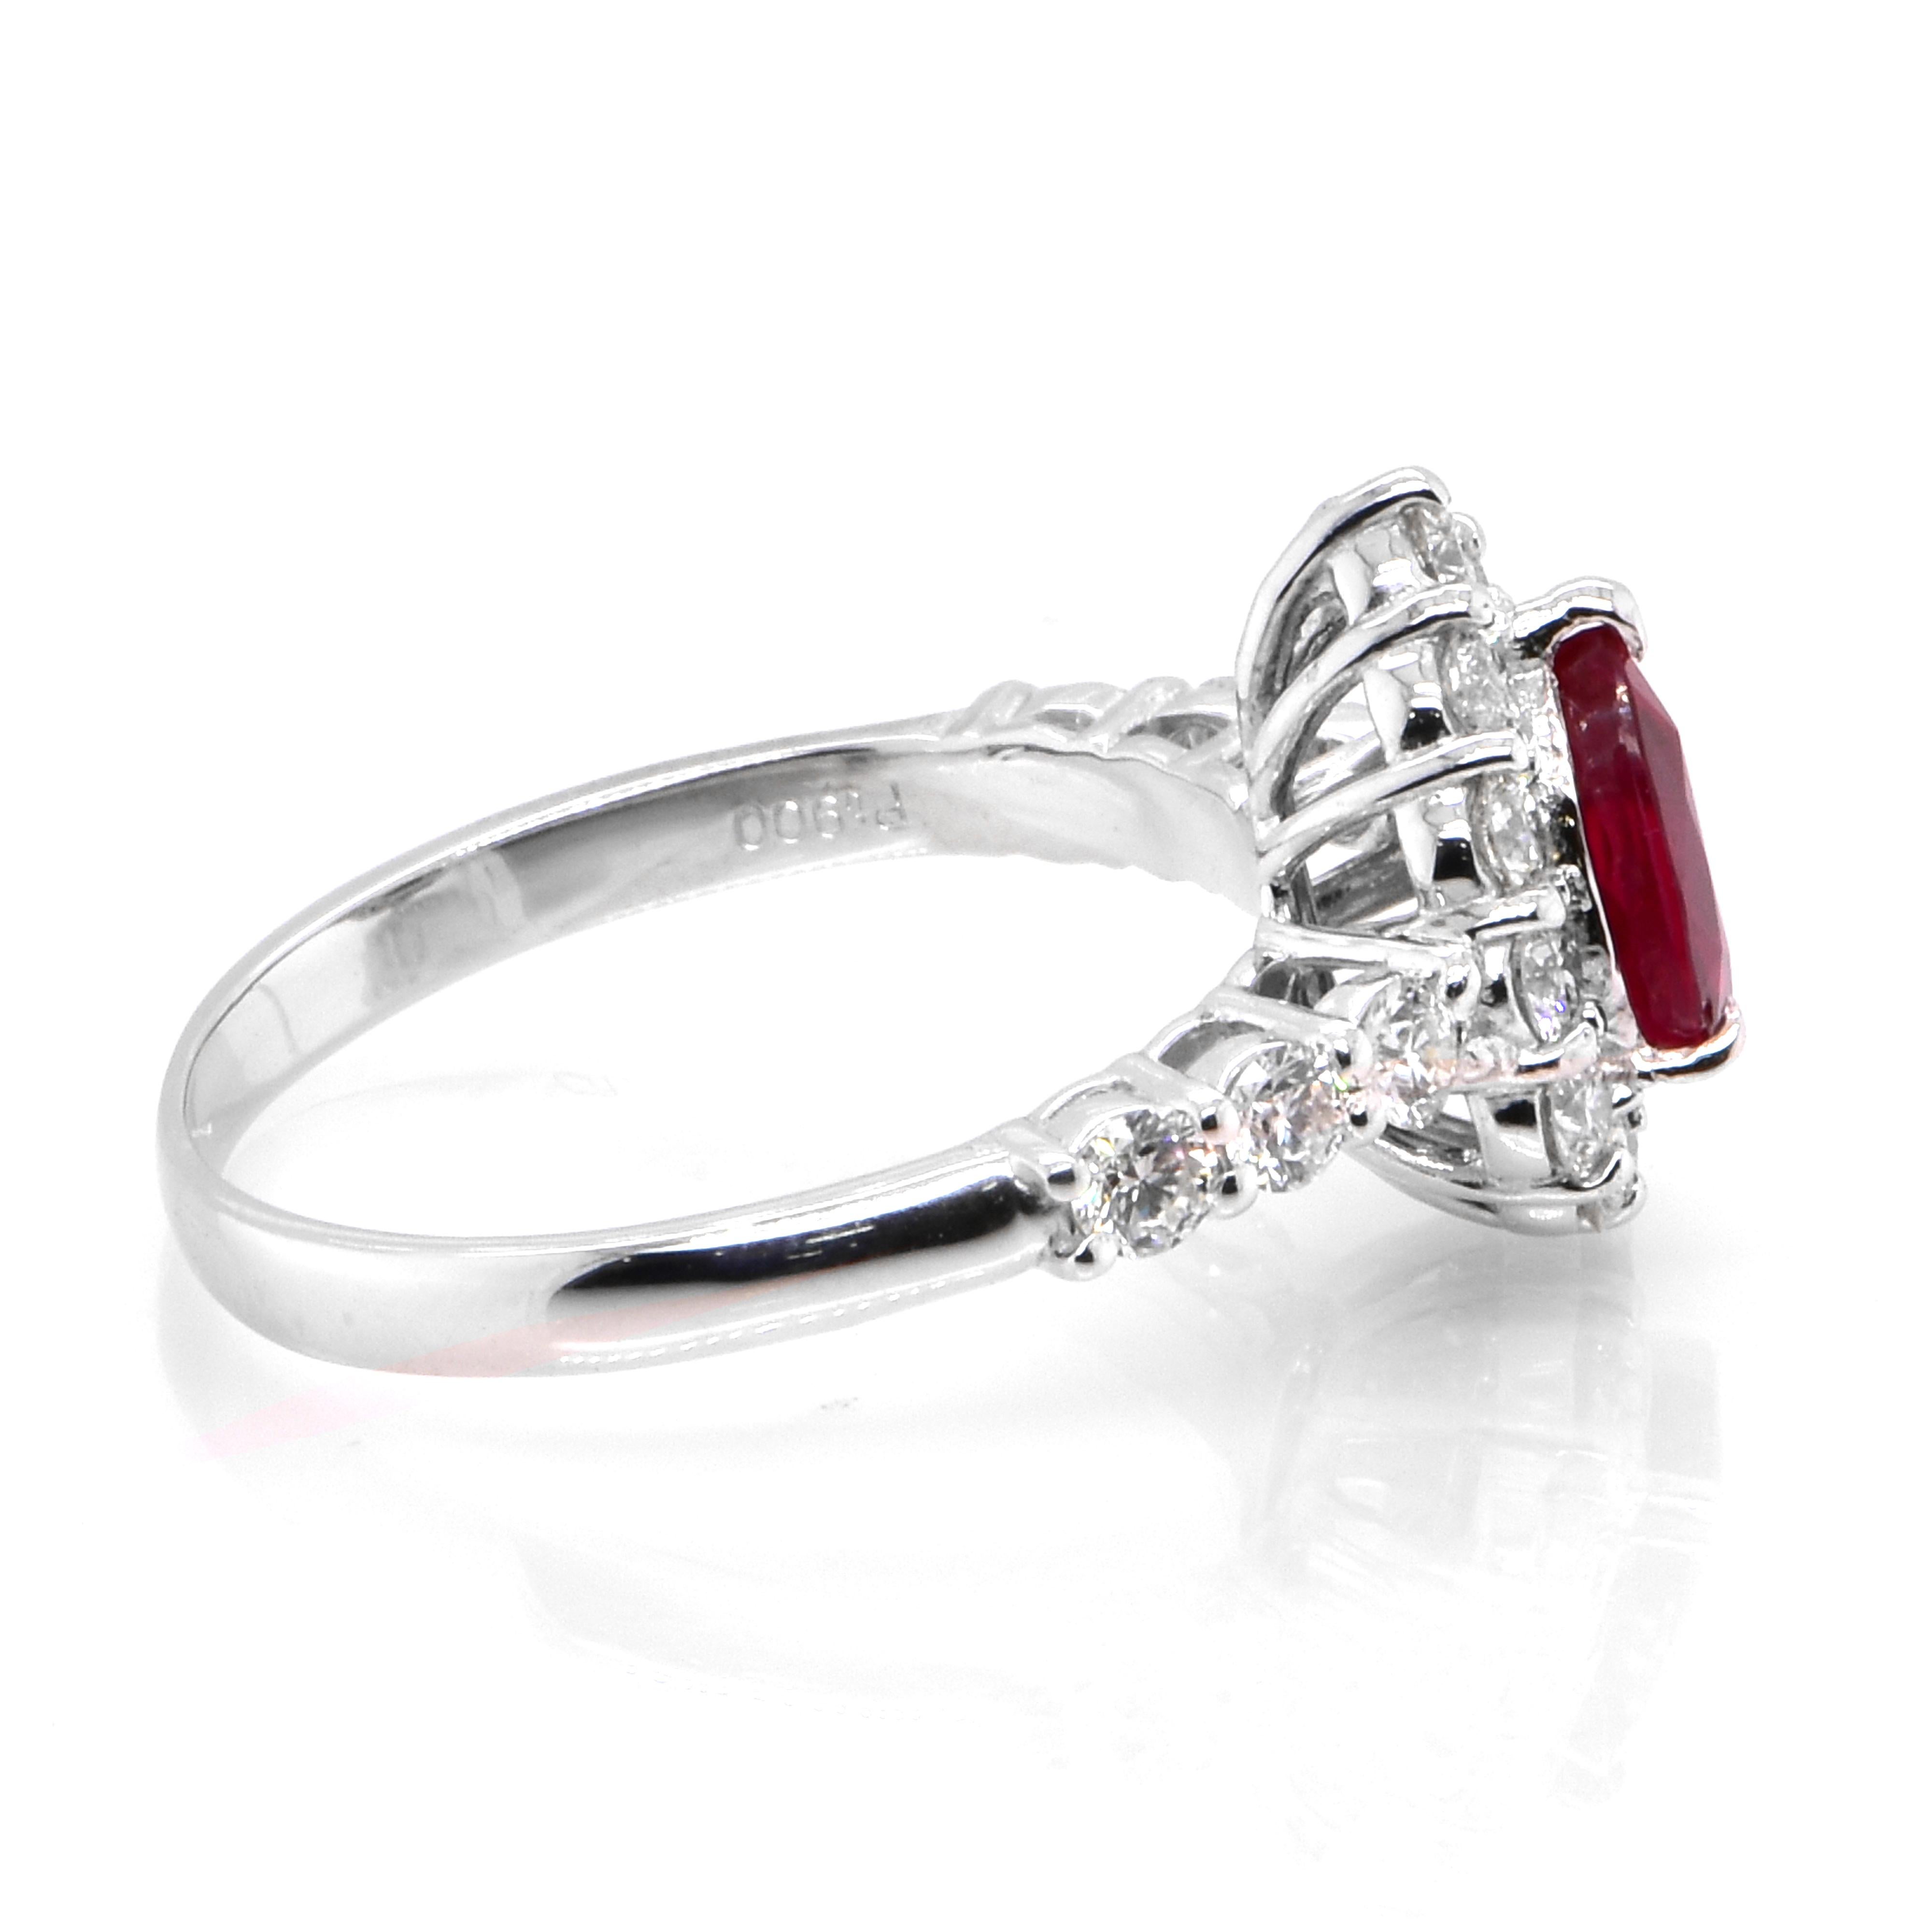 Pear Cut GIA Certified 1.03 Carat, Pigeon Blood Red, Burmese Ruby Ring Made in Platinum For Sale